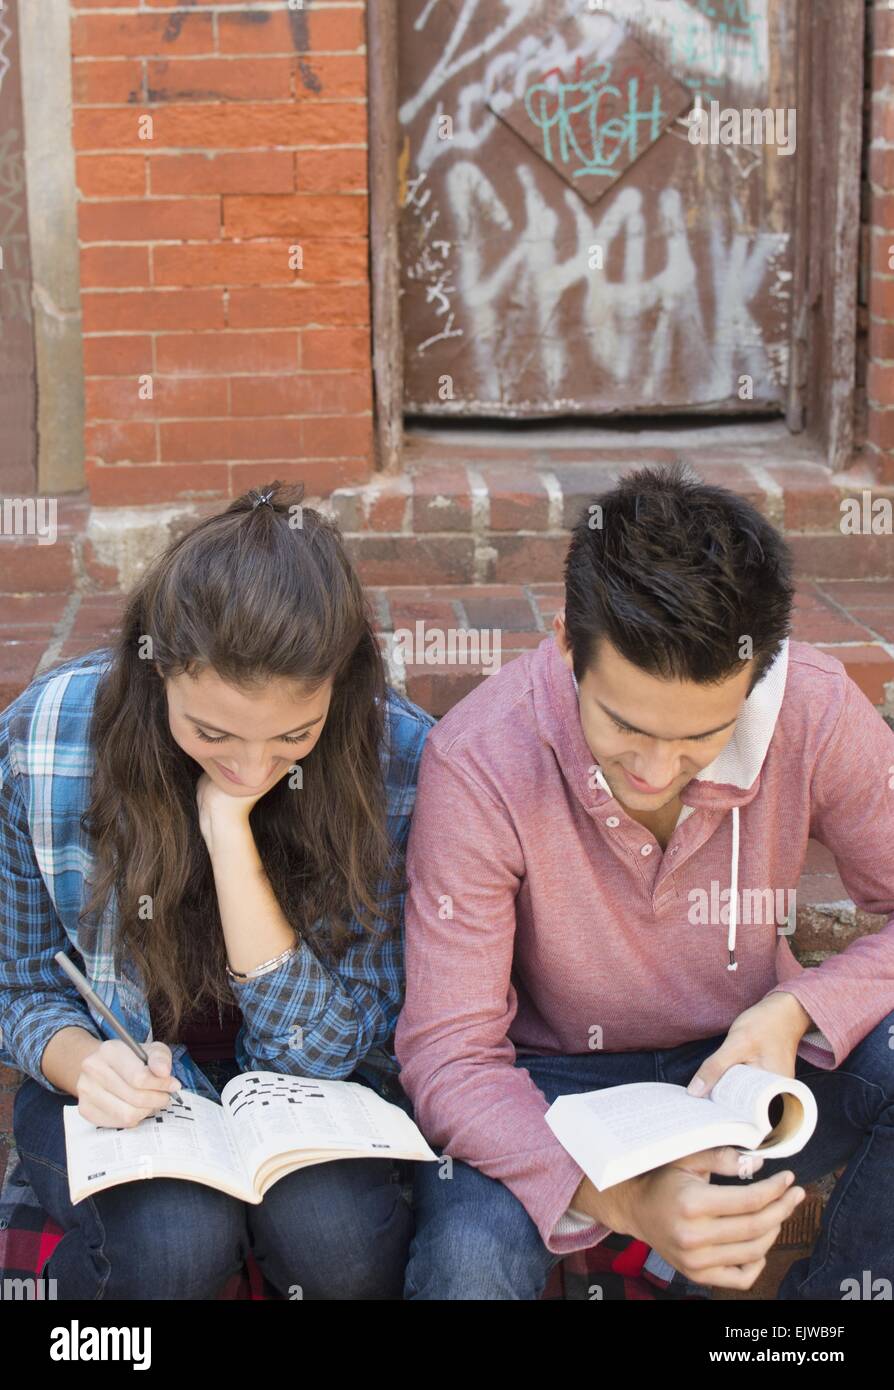 USA, New York State, New York City, Brooklyn, Young couple reading book and doing crossword Stock Photo